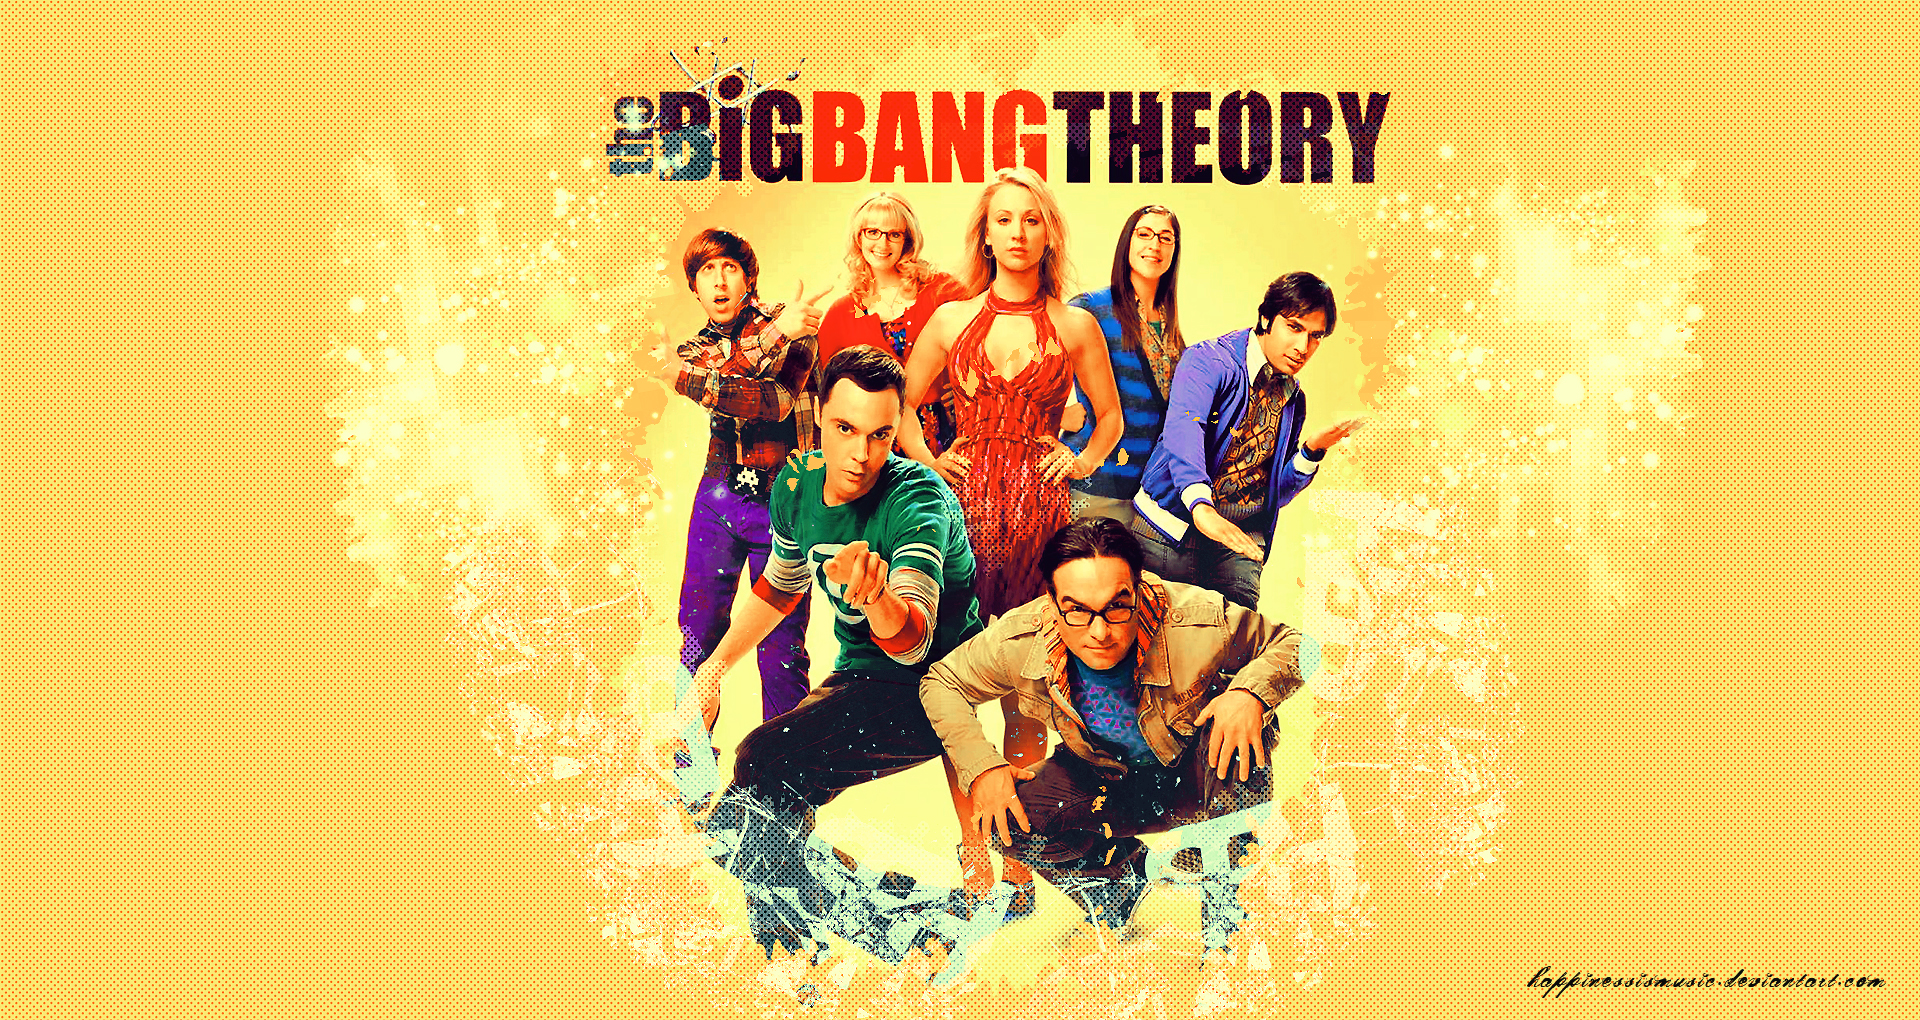 The big bang theory wallpaper 4 by HappinessIsMusic on DeviantArt